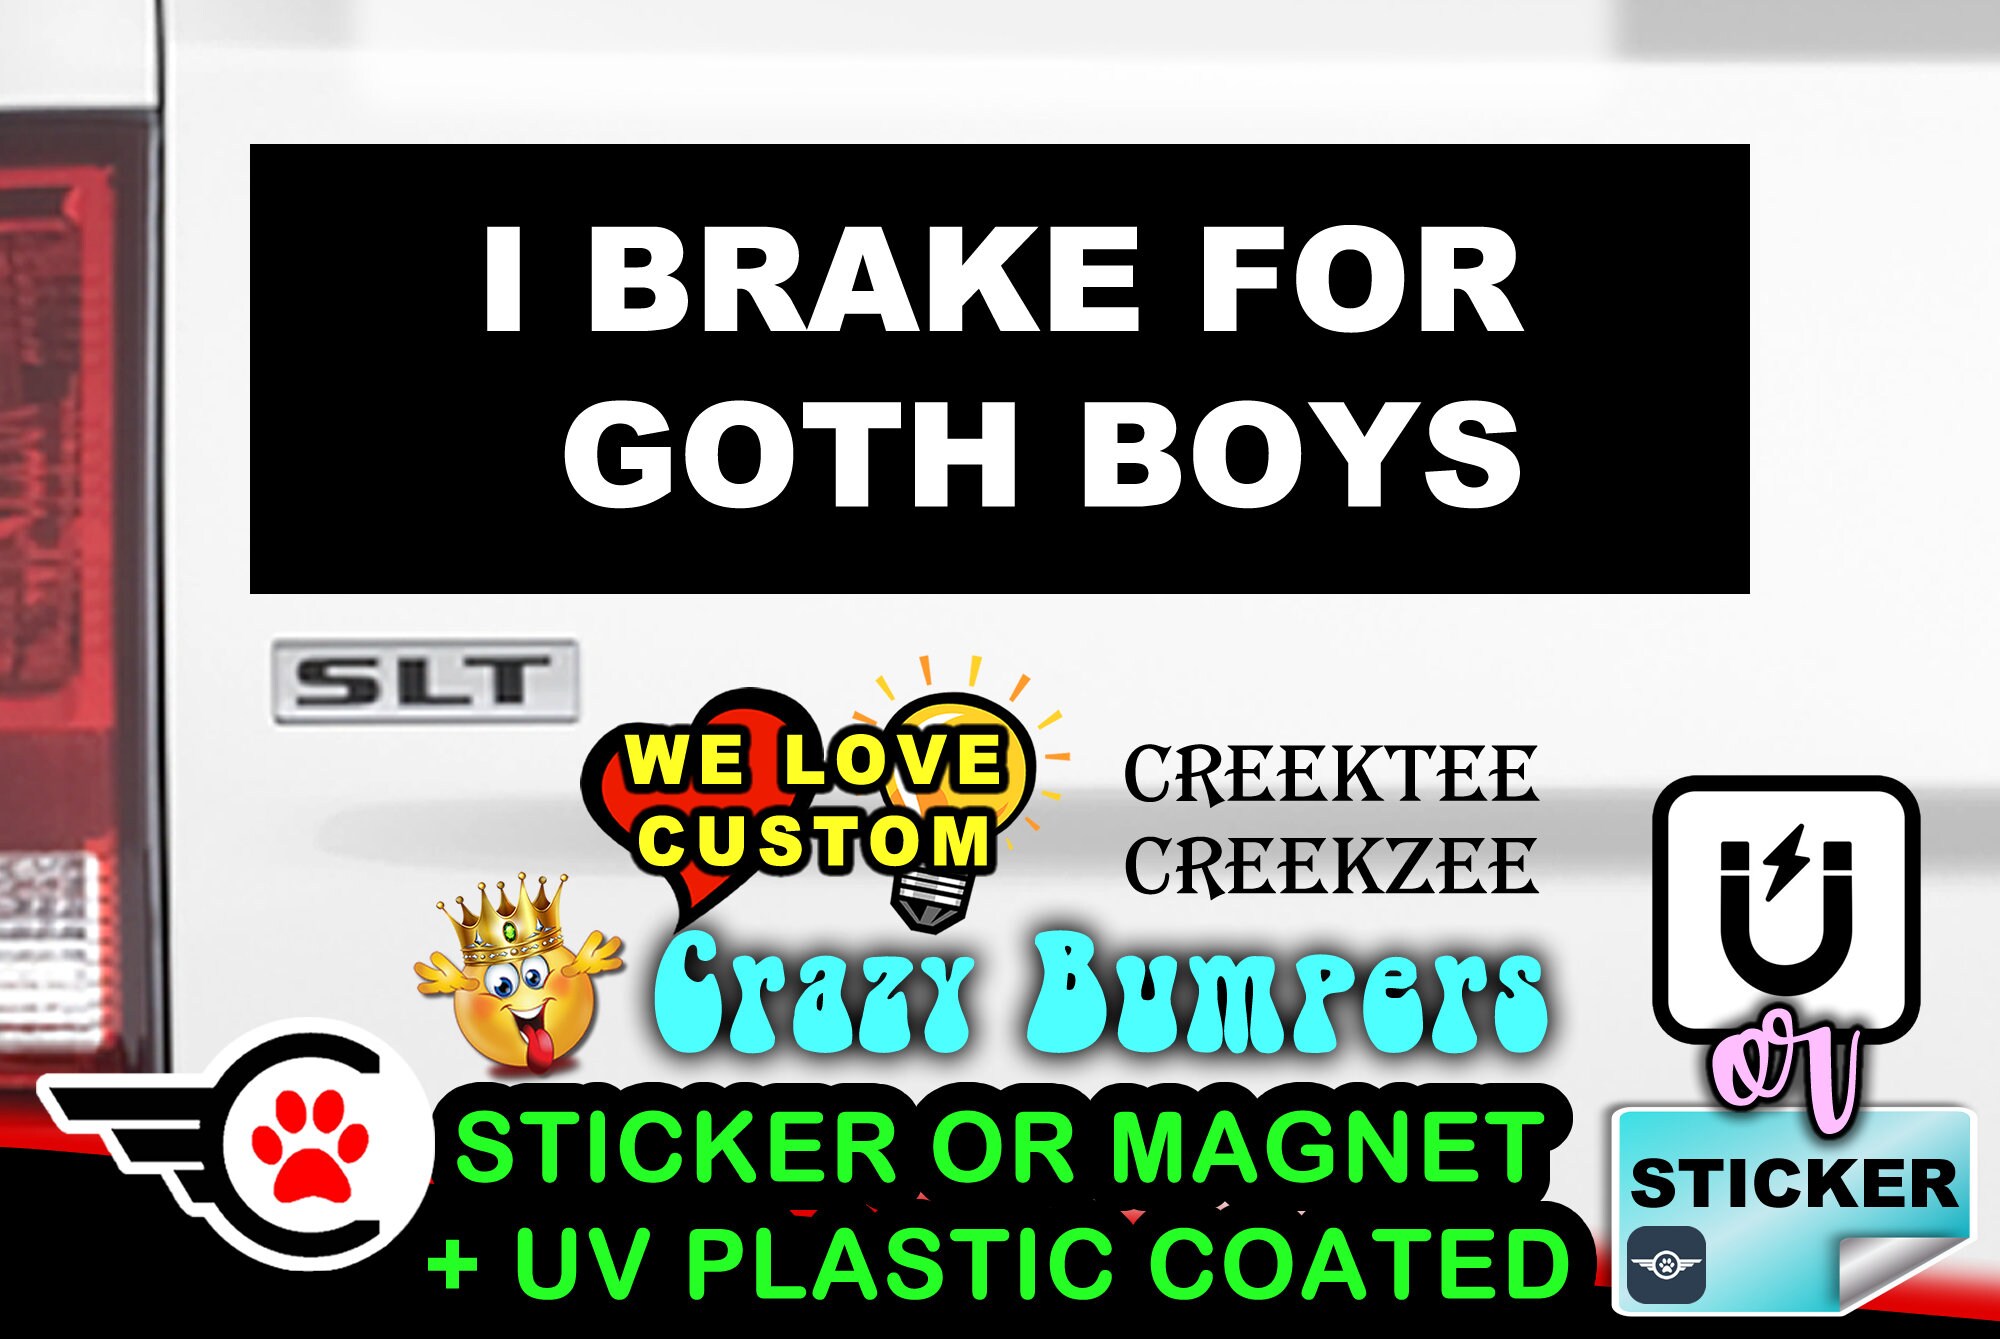 I Brake For Goth Boys Funny Bumper Sticker or Magnet in various sizes Hiqh Quality UV Laminate Coating